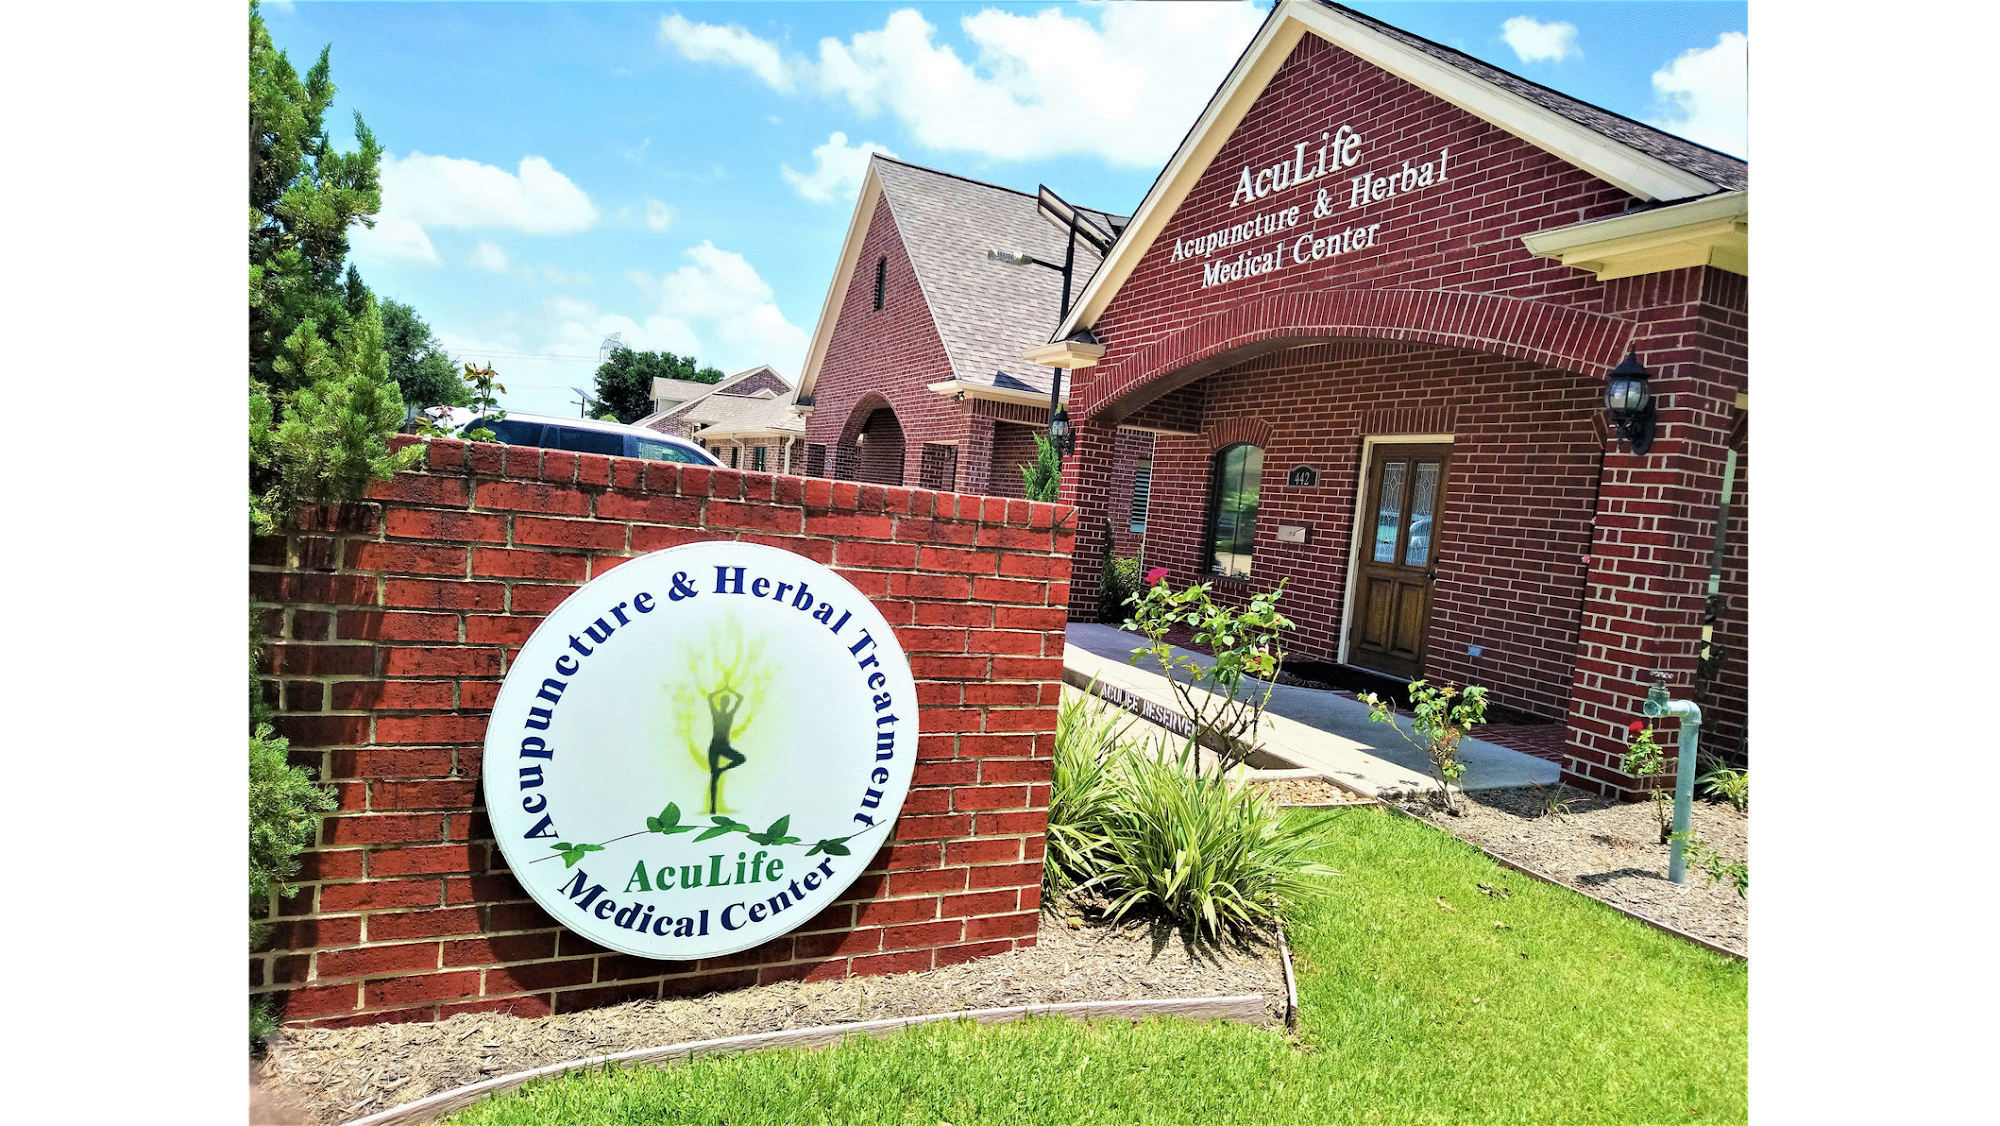 AcuLife Acupuncture Medical Center